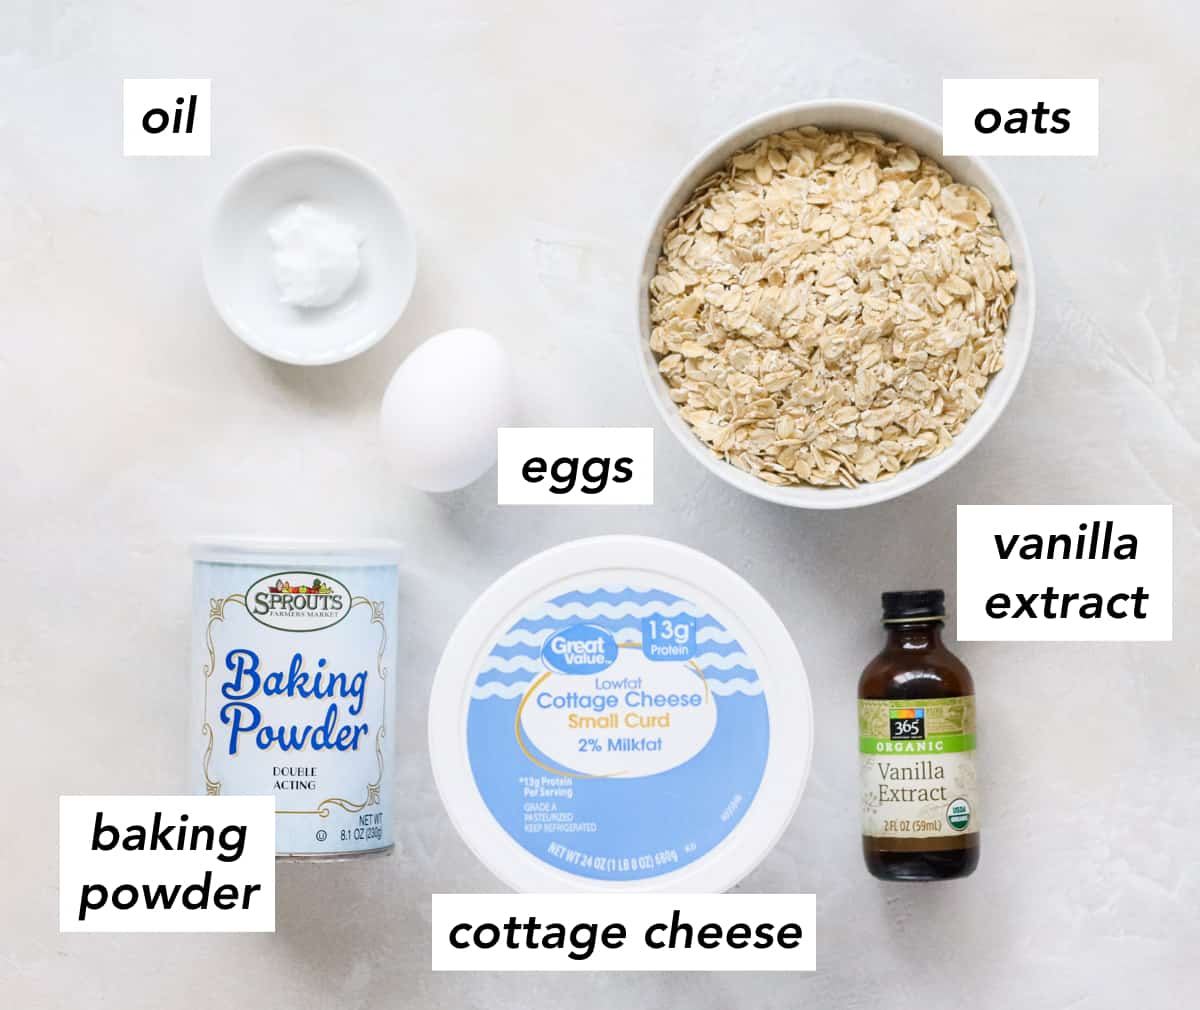 bowl of coconut oil, containers of baking powder and cottage cheese, bottle of vanilla extract, bowl of rolled oats, and an egg with text overlay describing ingredients.